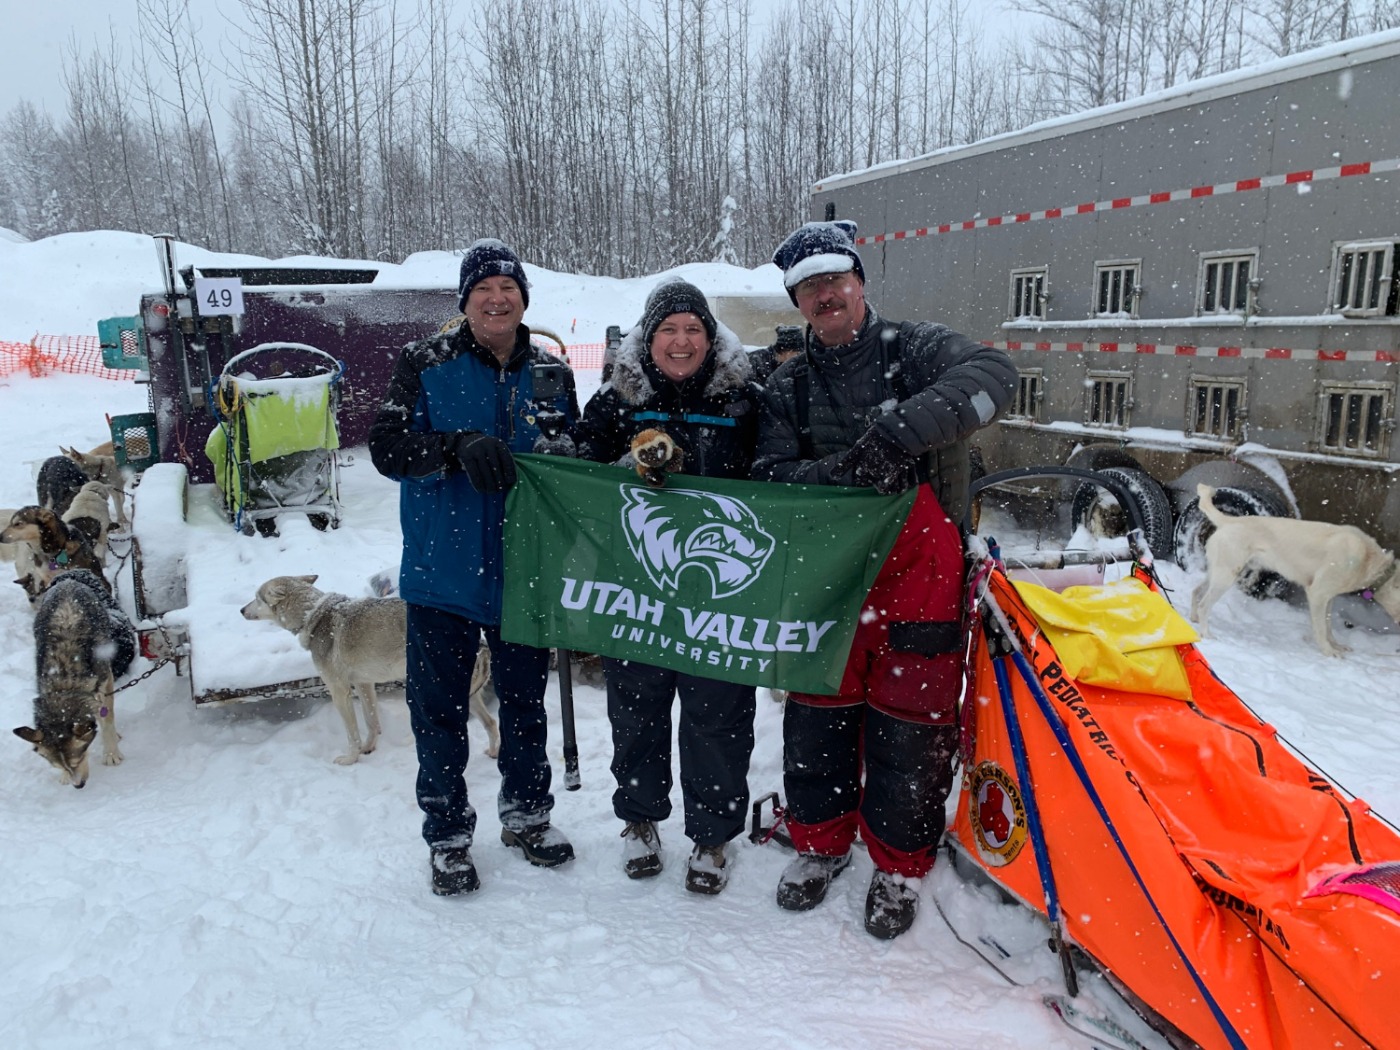 Mike Wisland, Emily Hedrick, and and musher Alan Eischens holding the UVU Flag with sleds and dogs about them.